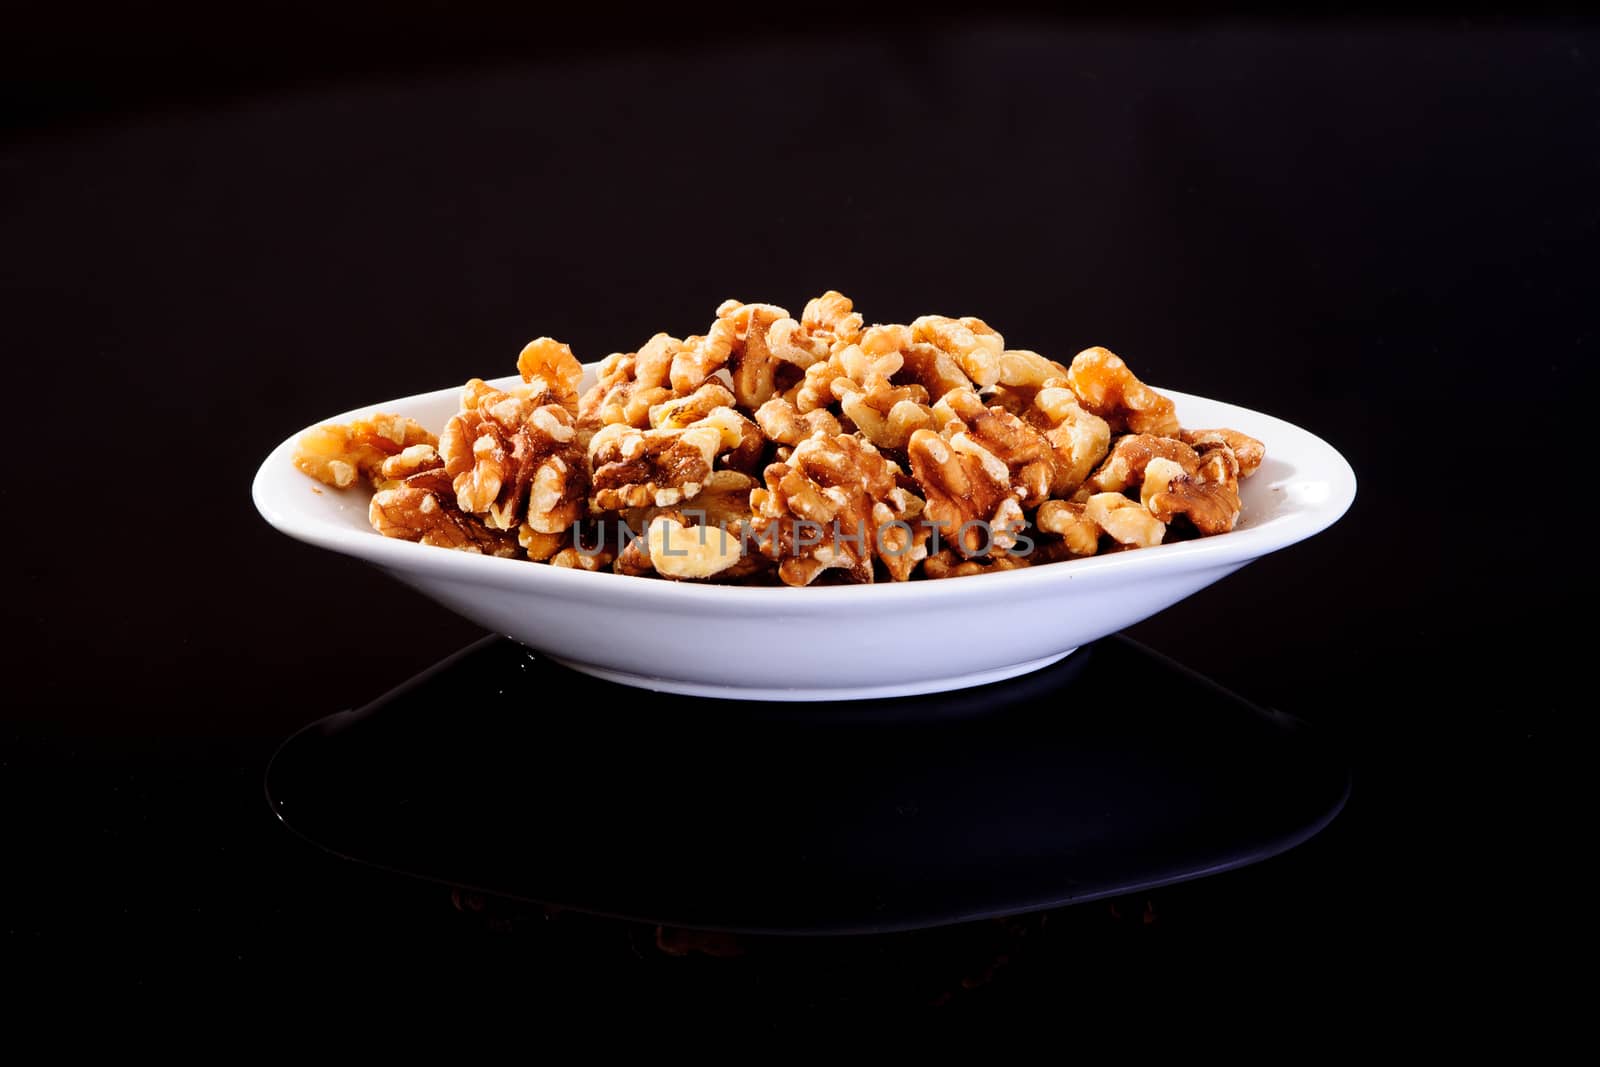 California Walnuts in a white plate on a black background